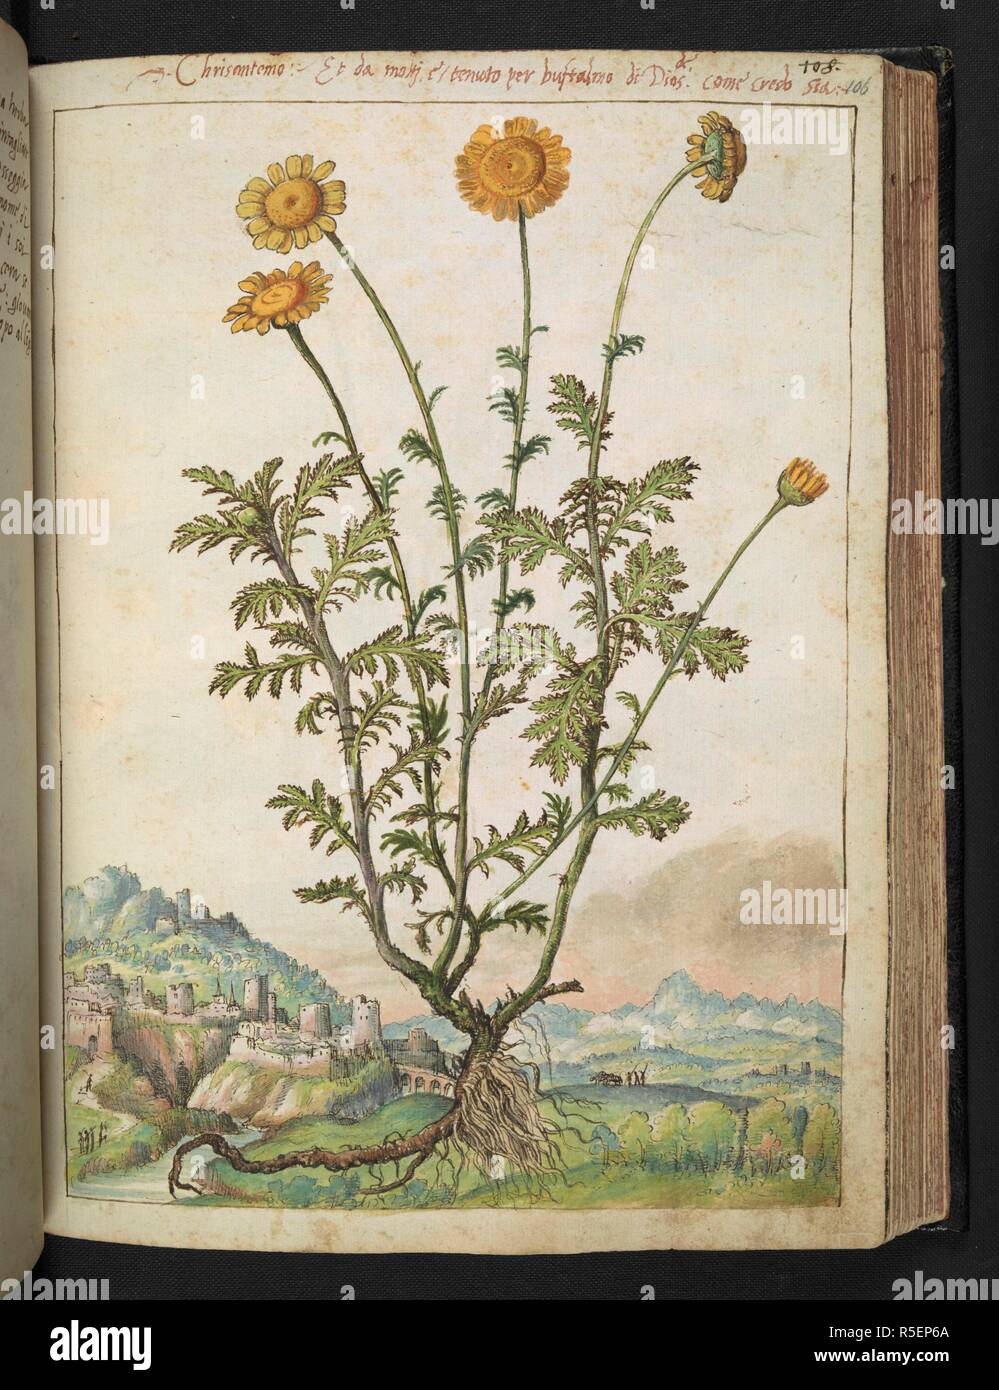 Chrisantemo.'  Chrysanthemums, sometimes called mums or chrysanths, are flowering plants of the genus Chrysanthemum in the family Asteraceae. Coloured drawings of plants, copied from nature in the Roman States, by Gerardo Cibo. Vol. I. Pietro Andrea Mattioli, Physician, of Siena: Extracts from his edition of Dioscorides' 'de re Medica':. Italy, c. 1564-1584. Source: Add. 22332 f.106. Language: Italian. Author: Cibo, Gheraldo. Stock Photo